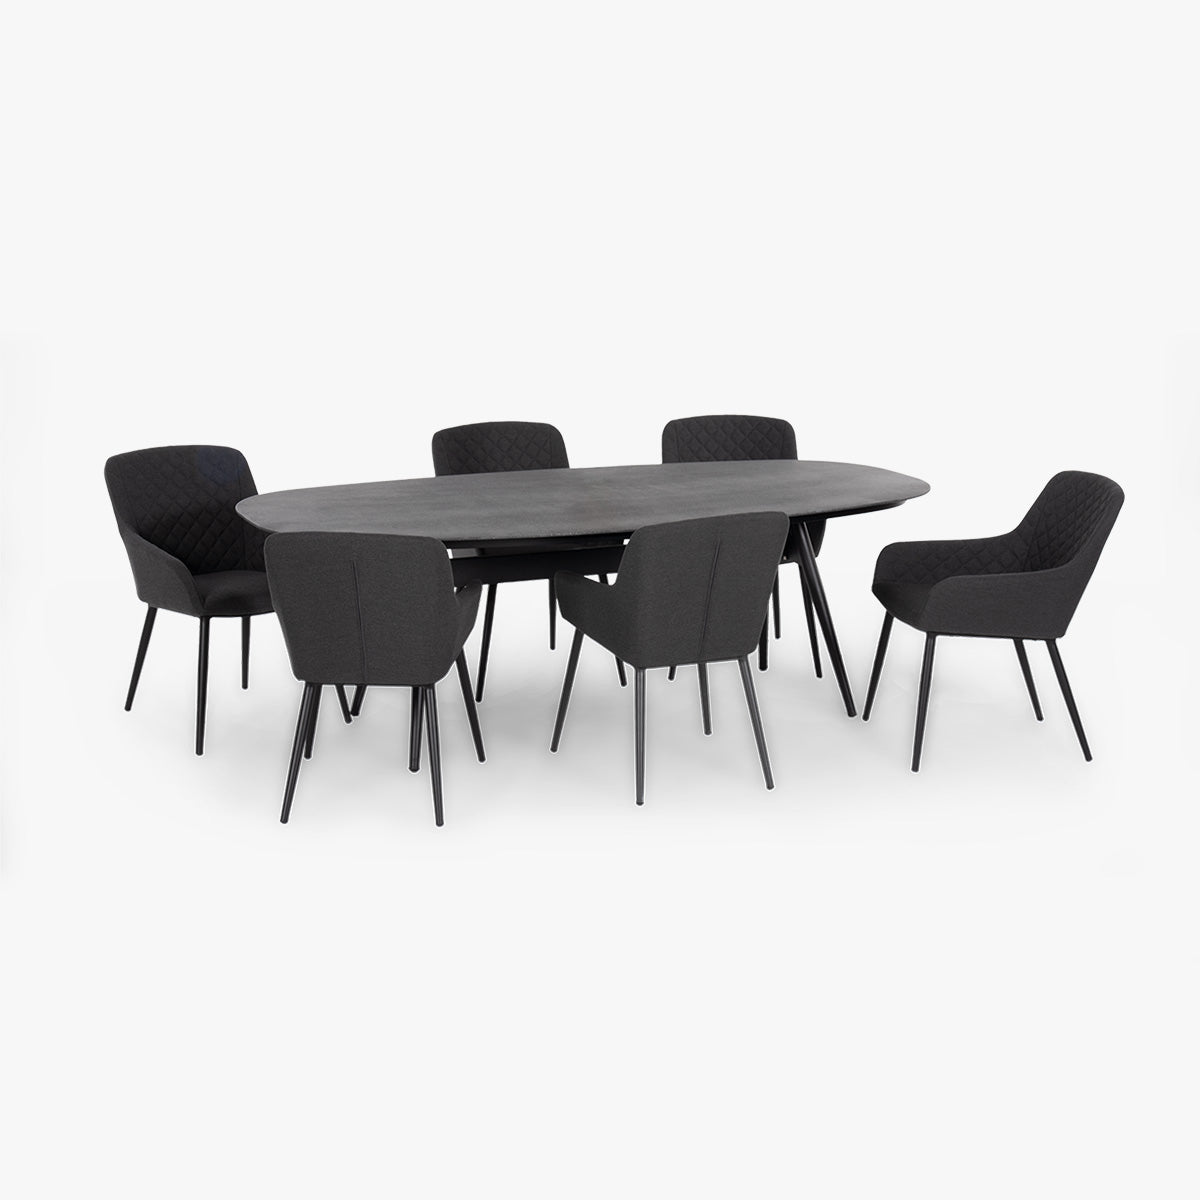 Outdoor Fabric Zest 6 Seat Oval Dining Set